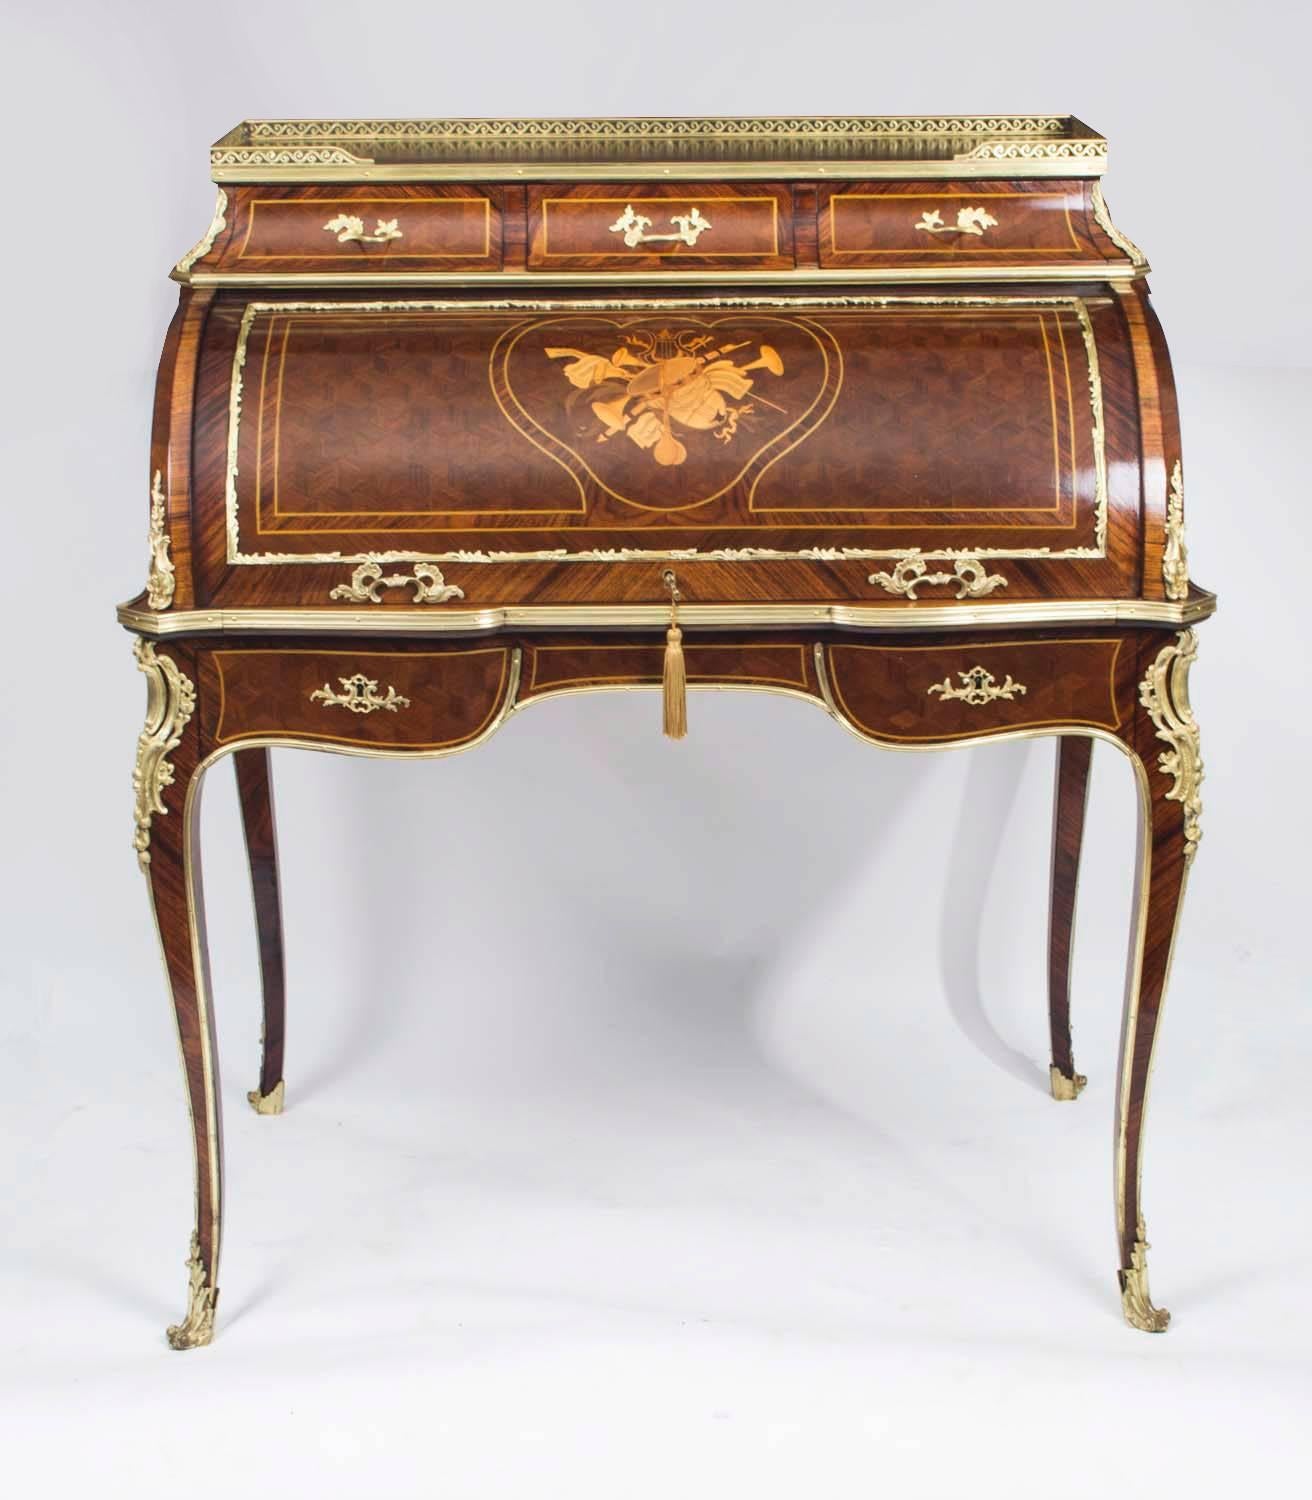 This is a gorgeous antique French kingwood, marquetry and parquetry Louis XV Revival secretaire a cylindre, circa 1890 in date.

This gorgeous cylinder bureau has a stunning marquetry panel of musical instruments, finished in exotic woods, on the